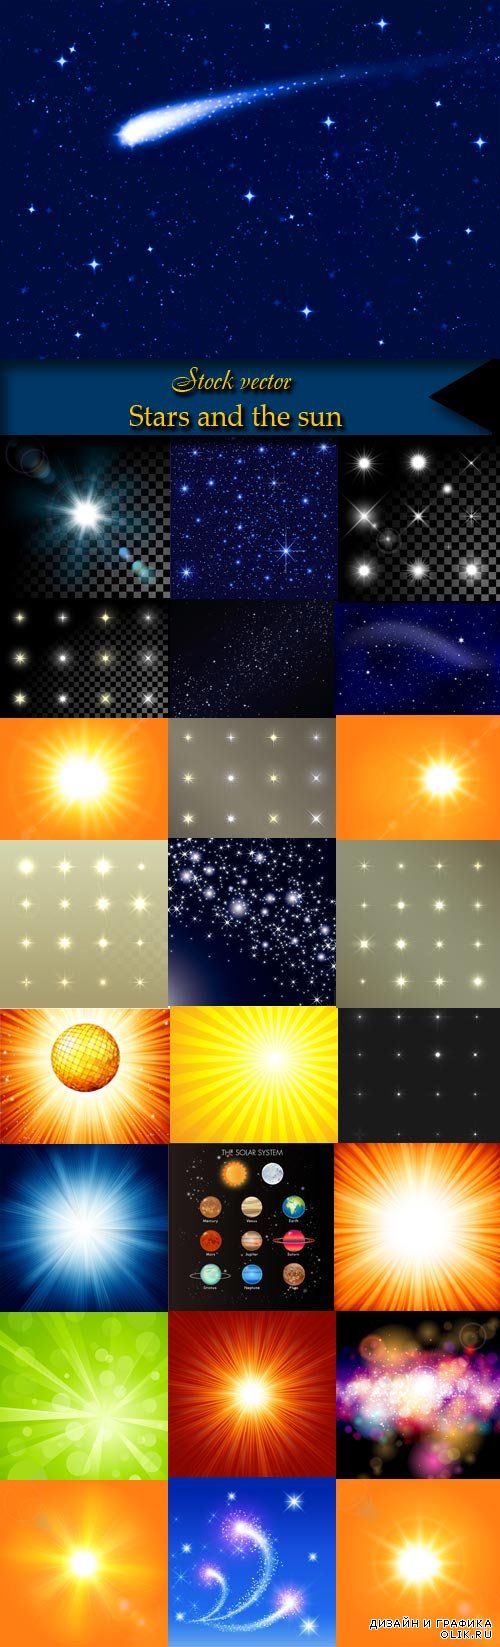 Stars and the sun